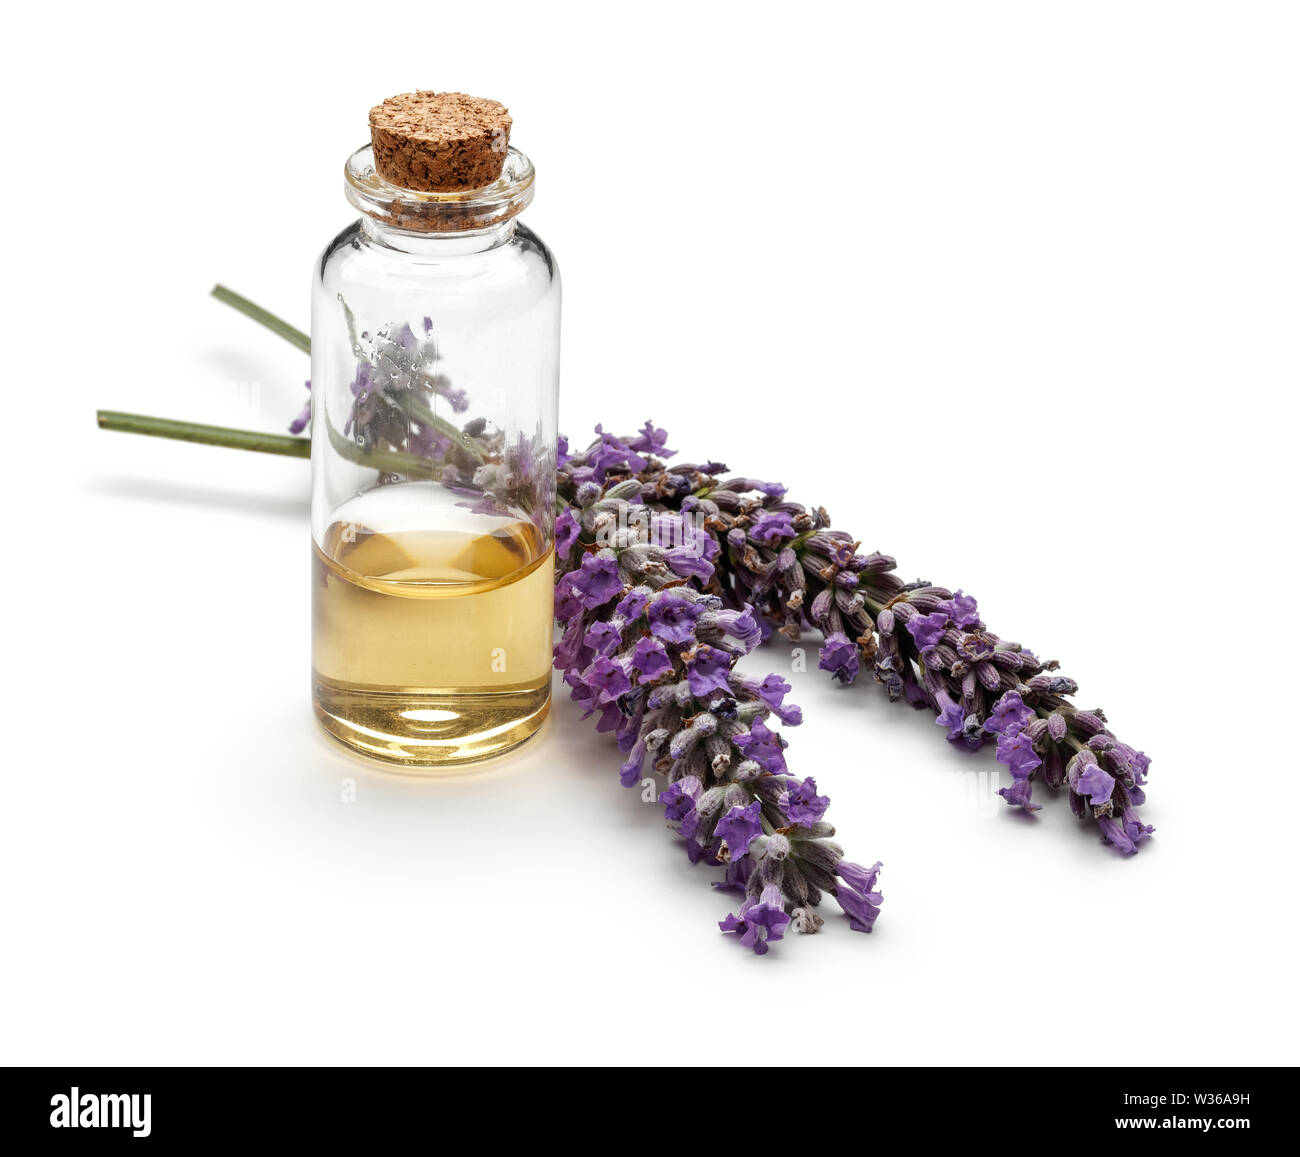 Fresh lavender and a bottle of lavender oil isolated on white background Stock Photo